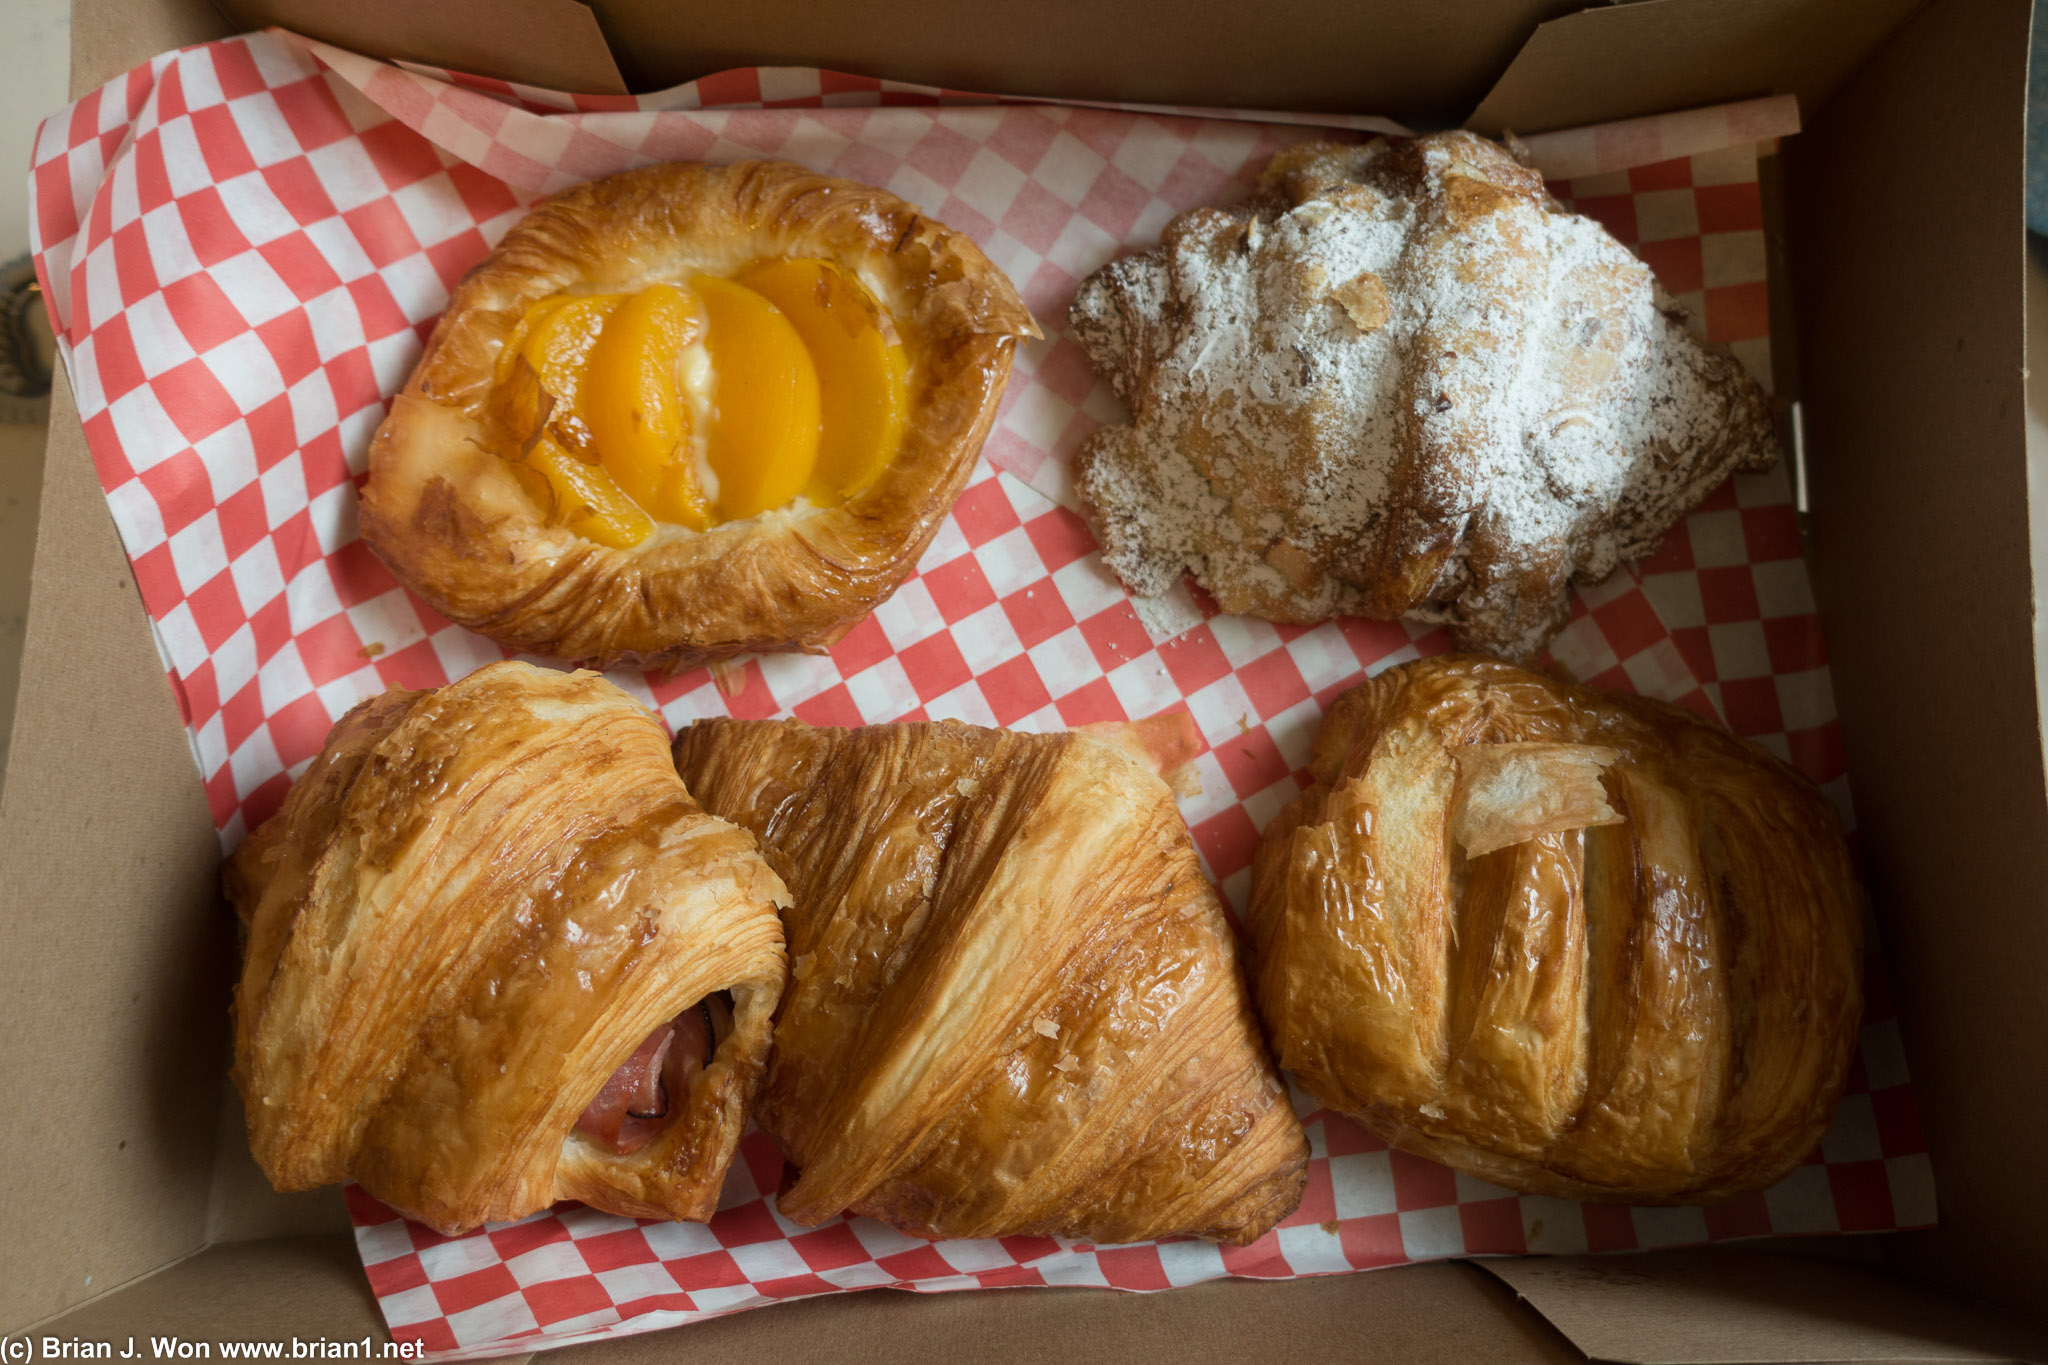 Clockwise from top left: apricot danish, almond, chocolate, plain, ham and cheese.